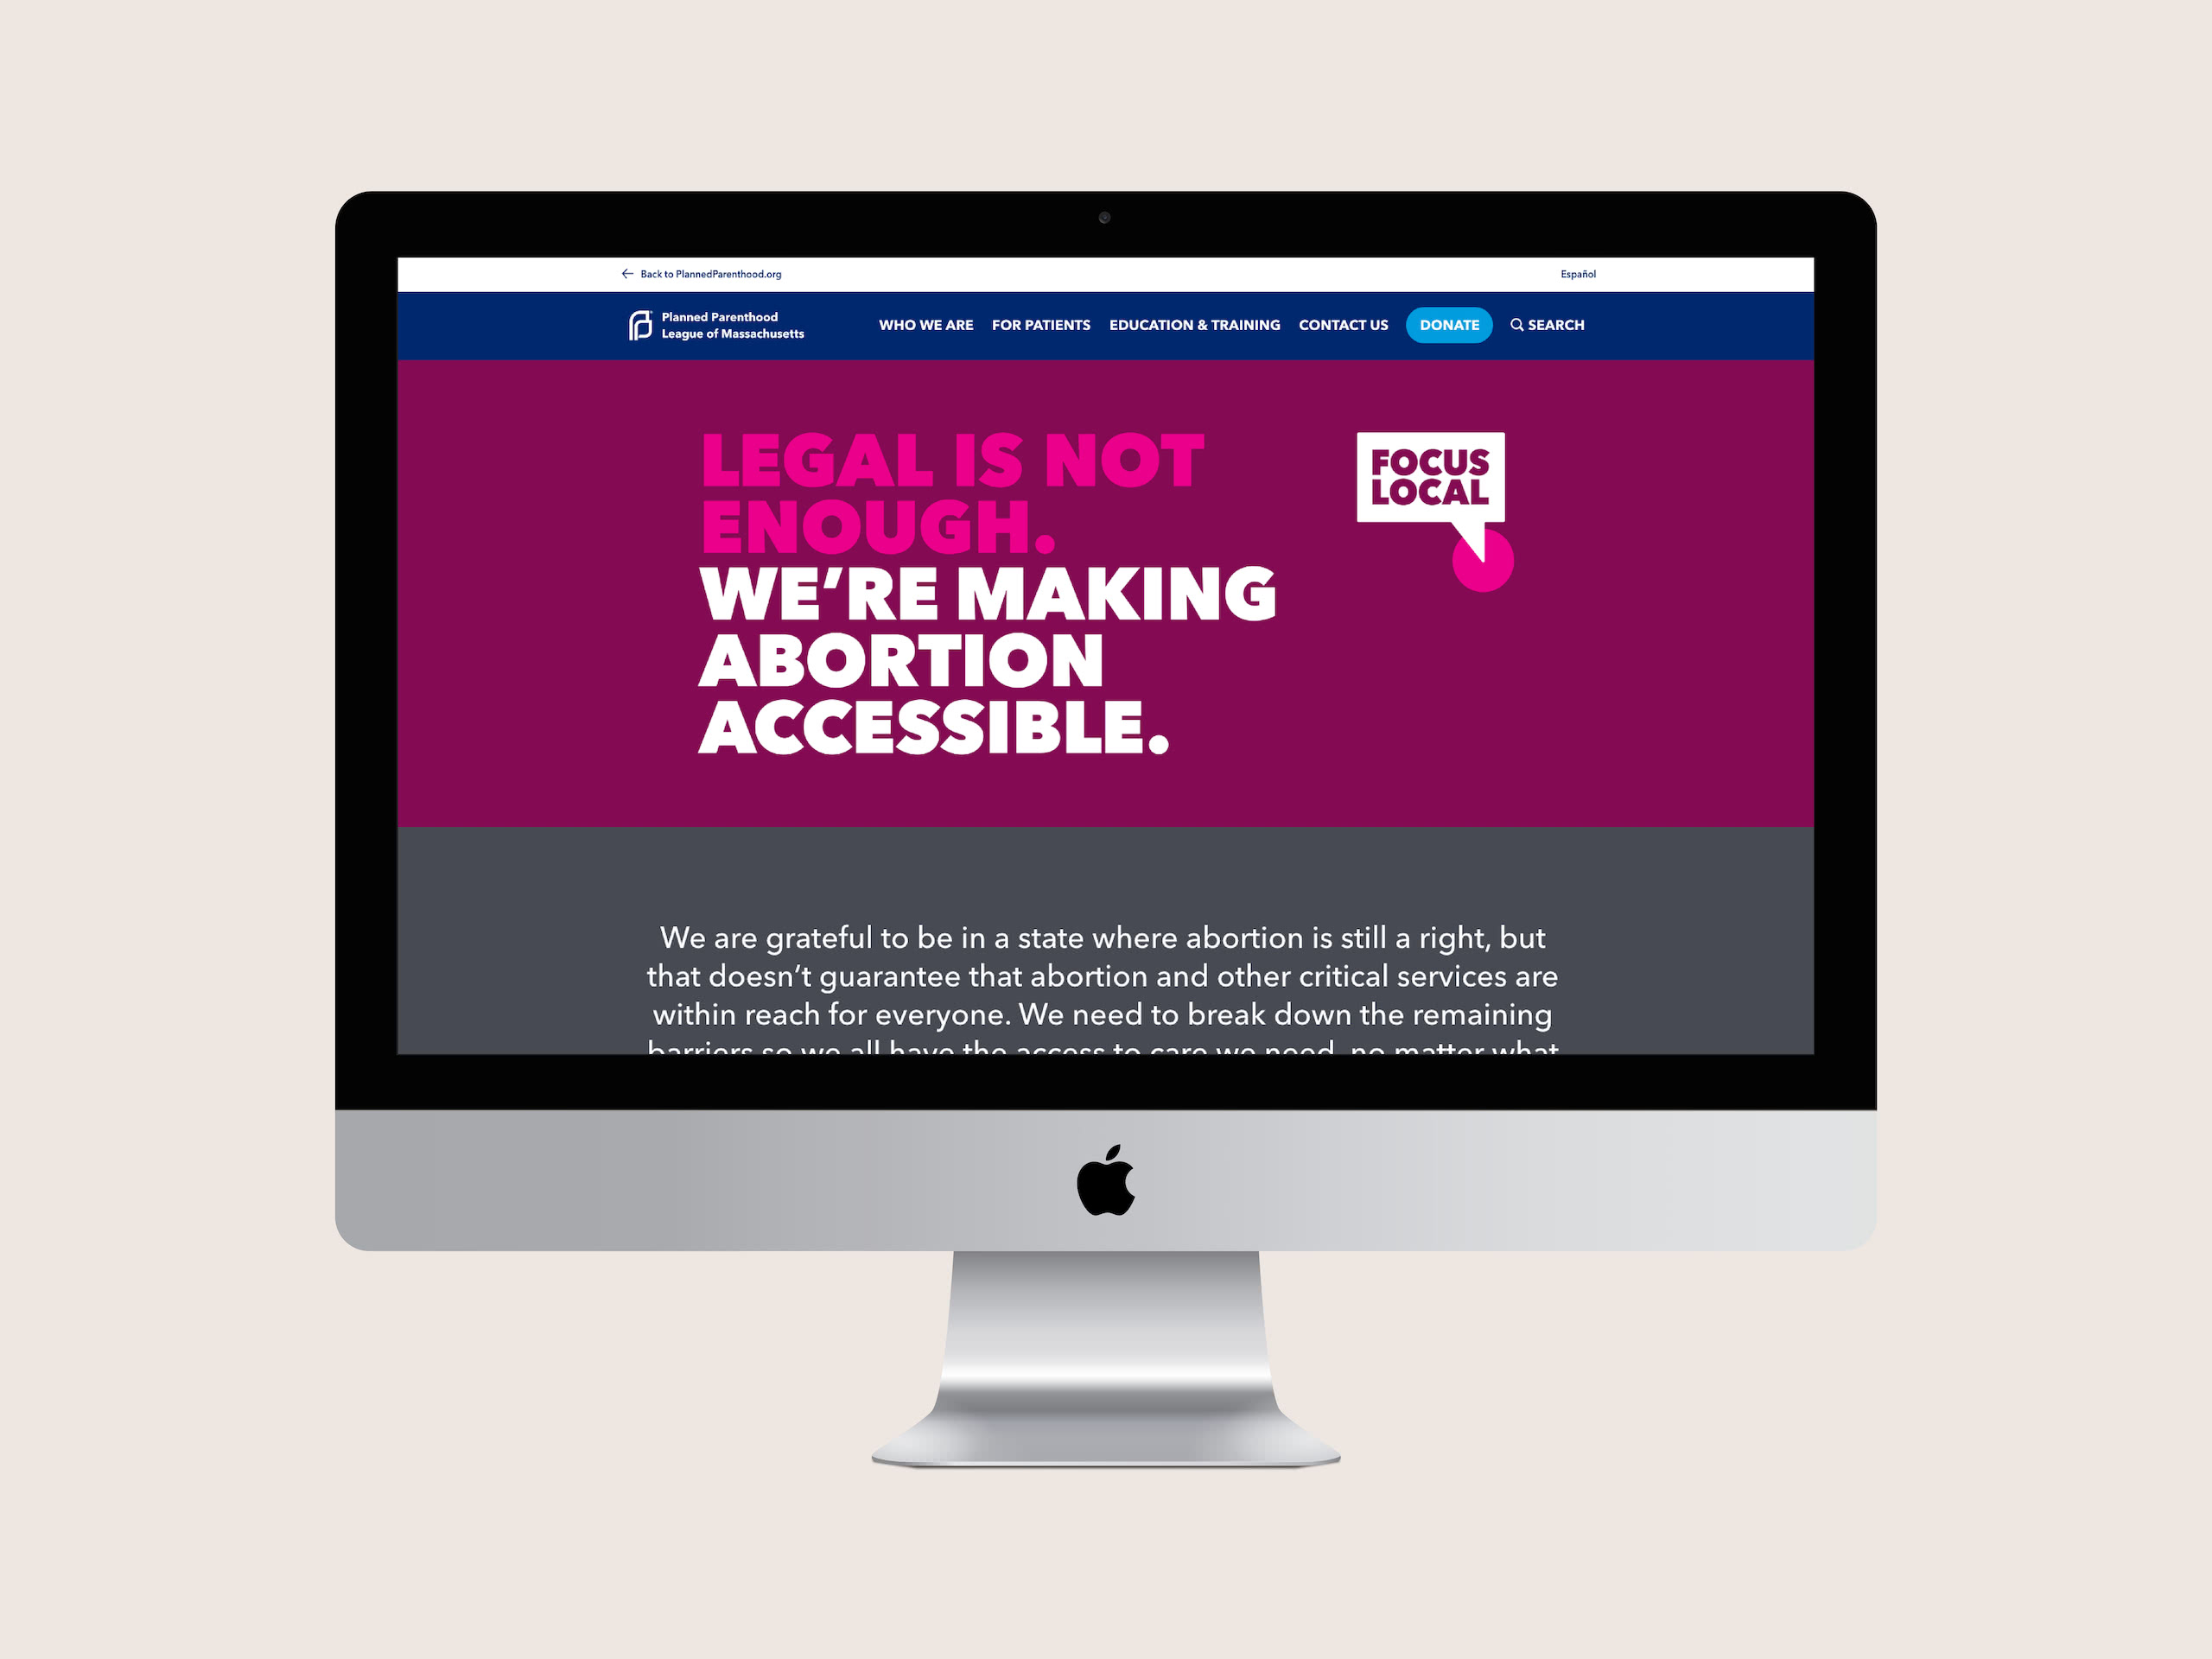 Screenshot of Focus Local campaign on the Planned Parenthood League of Massachusetts website.
Logo: Focus local
Text content: Legal is not enough. We're making abortion accessible. 